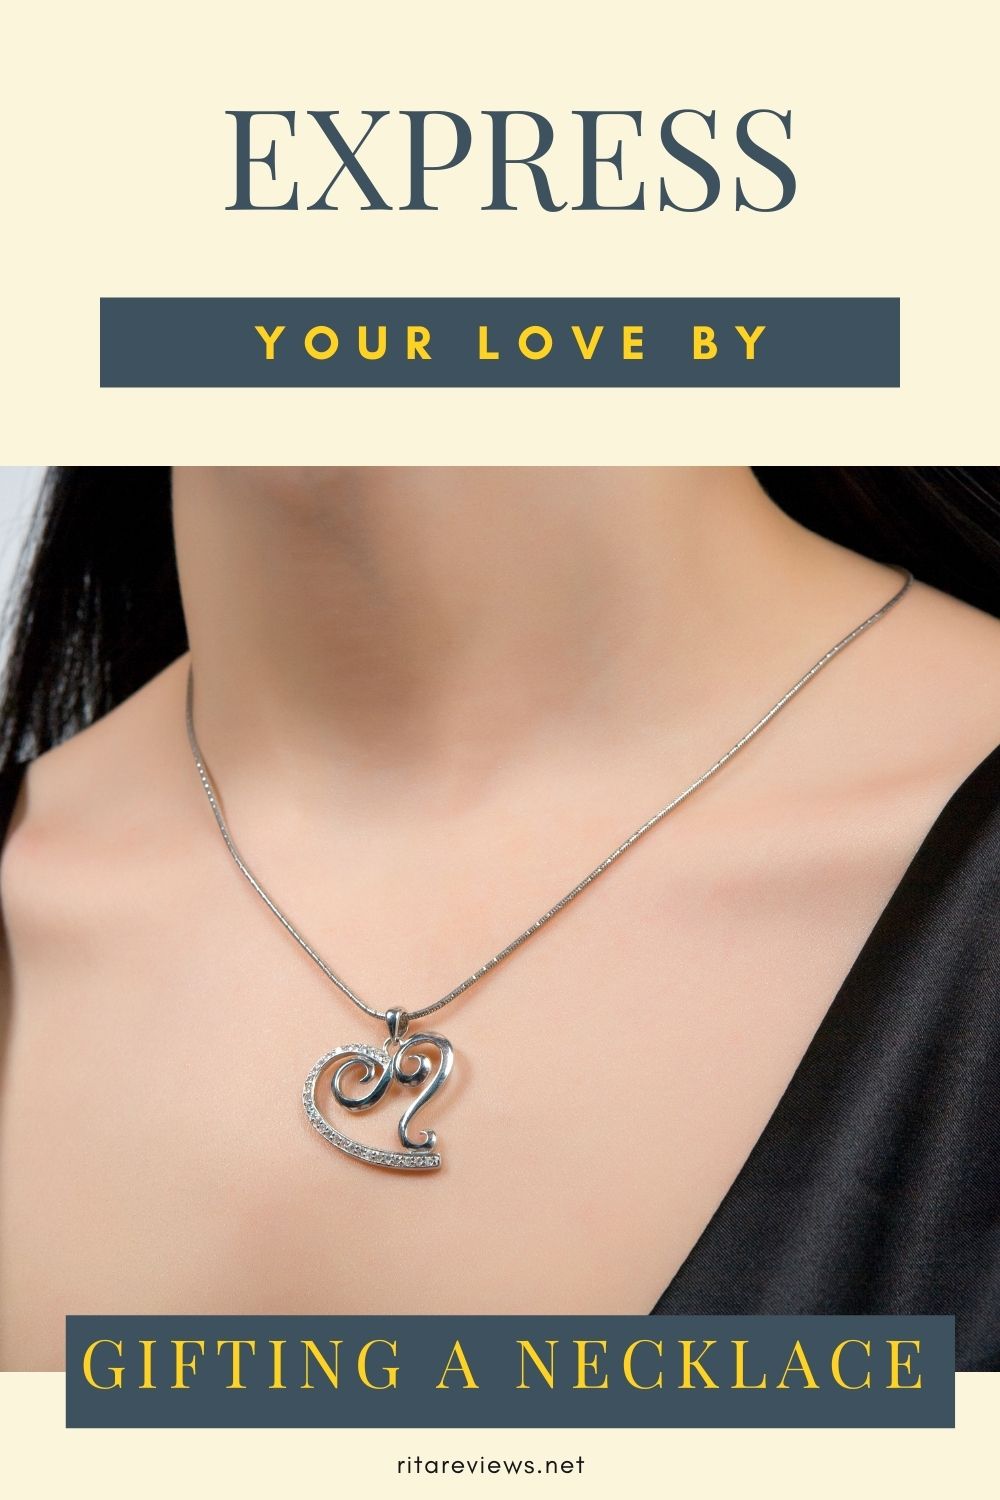 Express Your Love by Gifting a Necklace